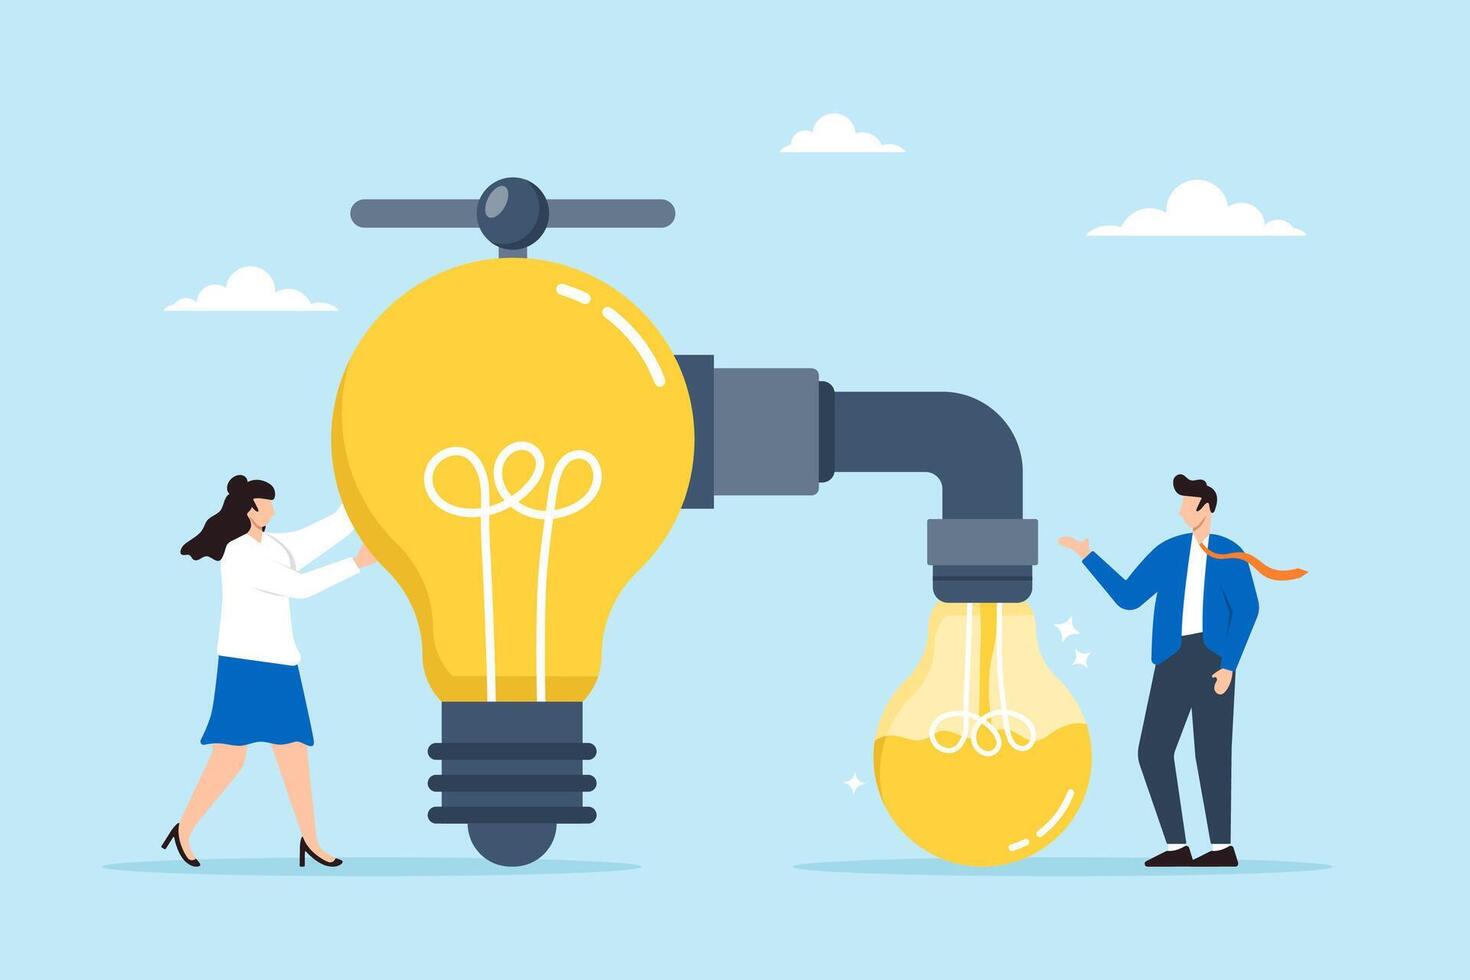 Businesspeople sharing knowledge transfer ideas, passing information to new light bulb. Concept of transferring wisdom to colleagues, creativity, innovation, and continuous learning of new skills vector